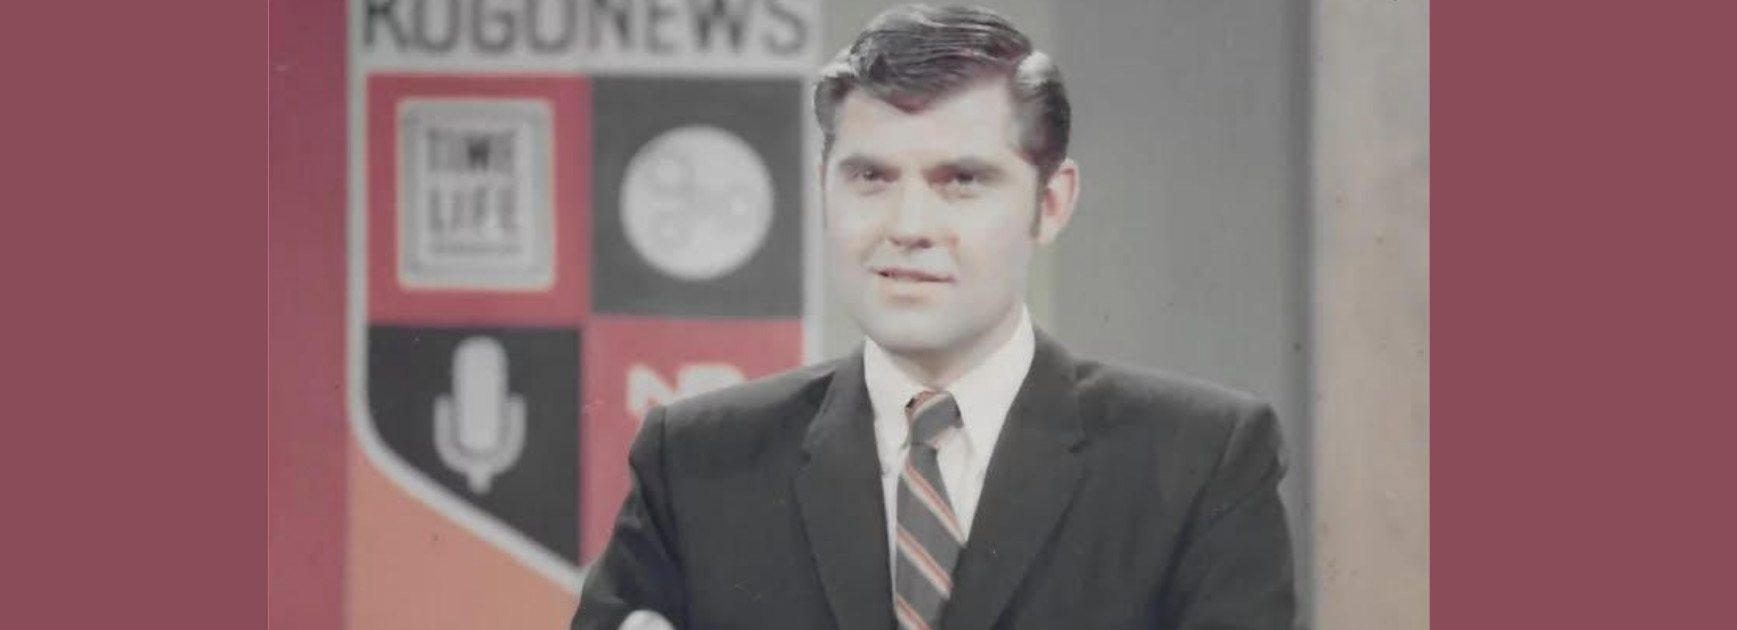 Jack White Excellence in Journalism Pays Tribute to San Diego News Anchor 